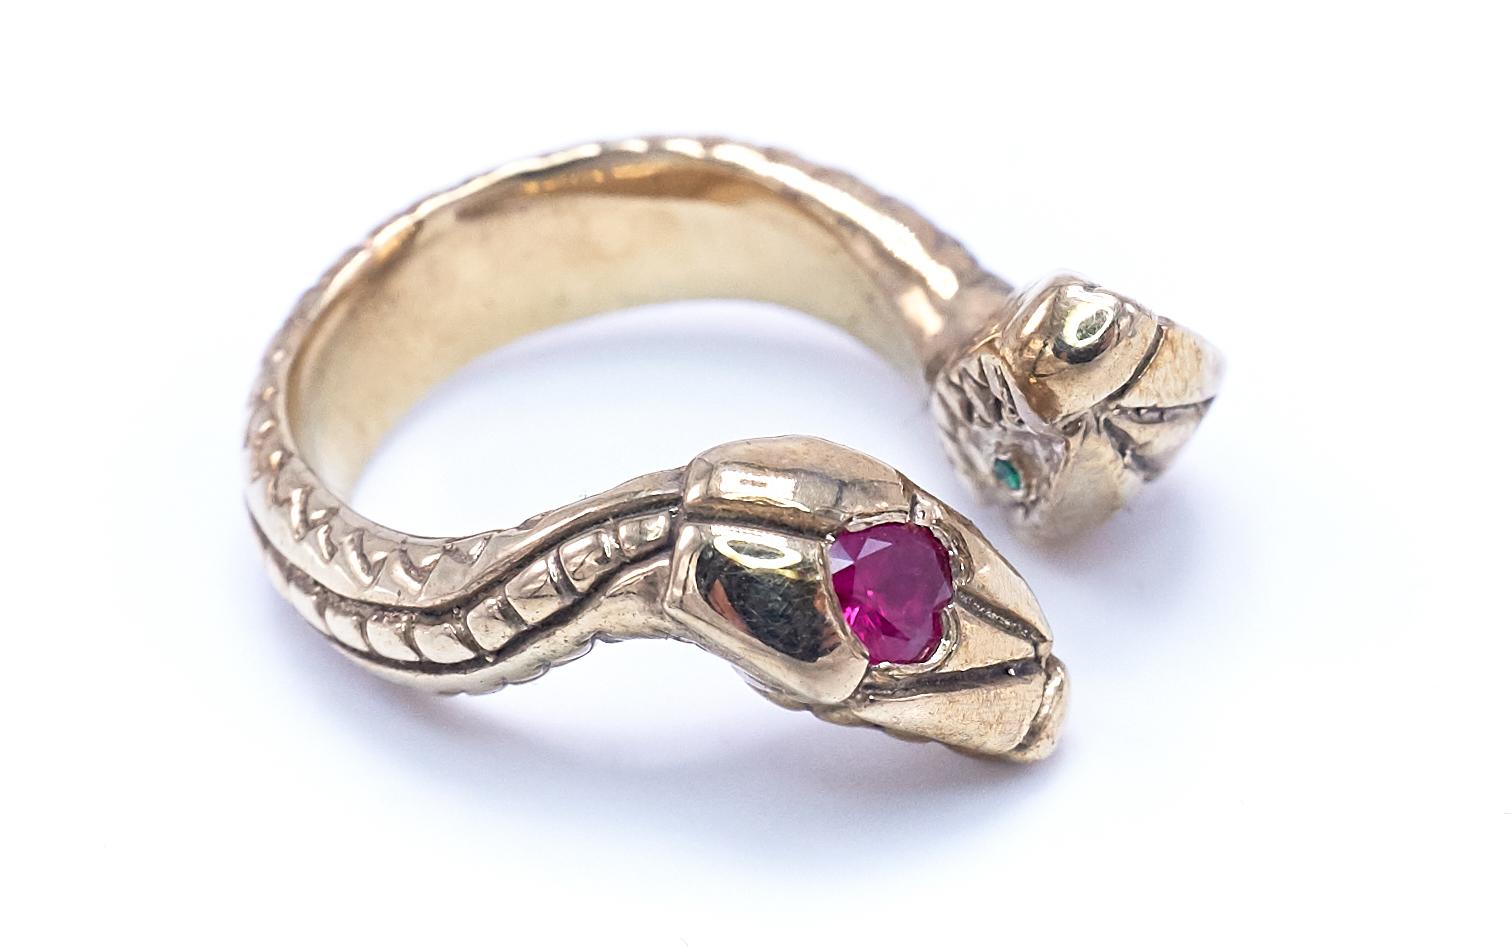 Contemporary Heart Ring Snake Ruby White Diamond Emerald Adjustable One Size J Dauphin For Sale